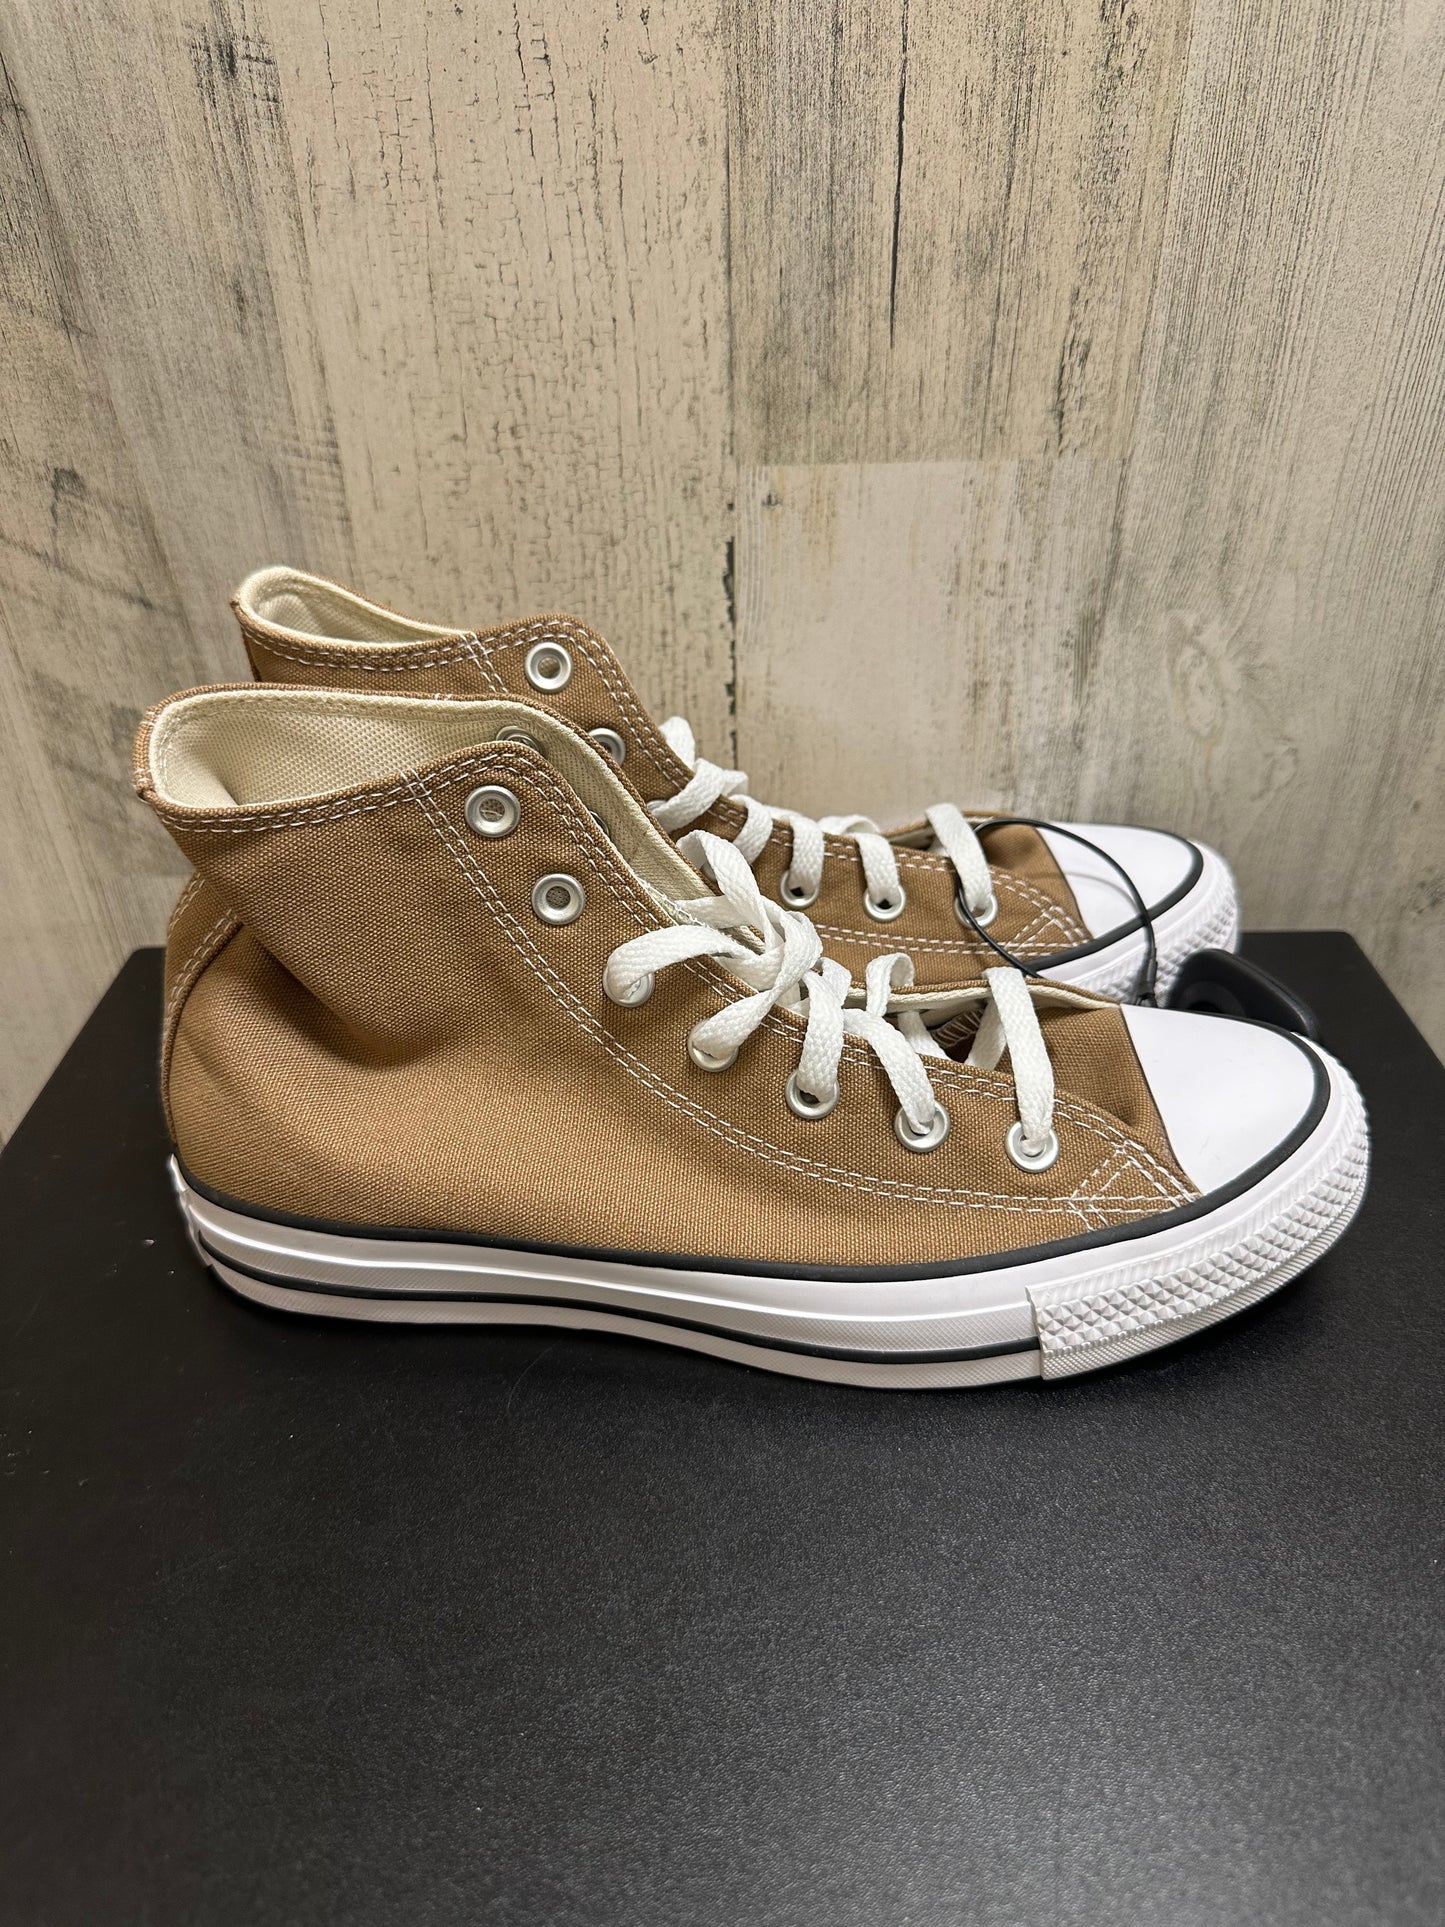 Brown Shoes Sneakers Converse, Size 8